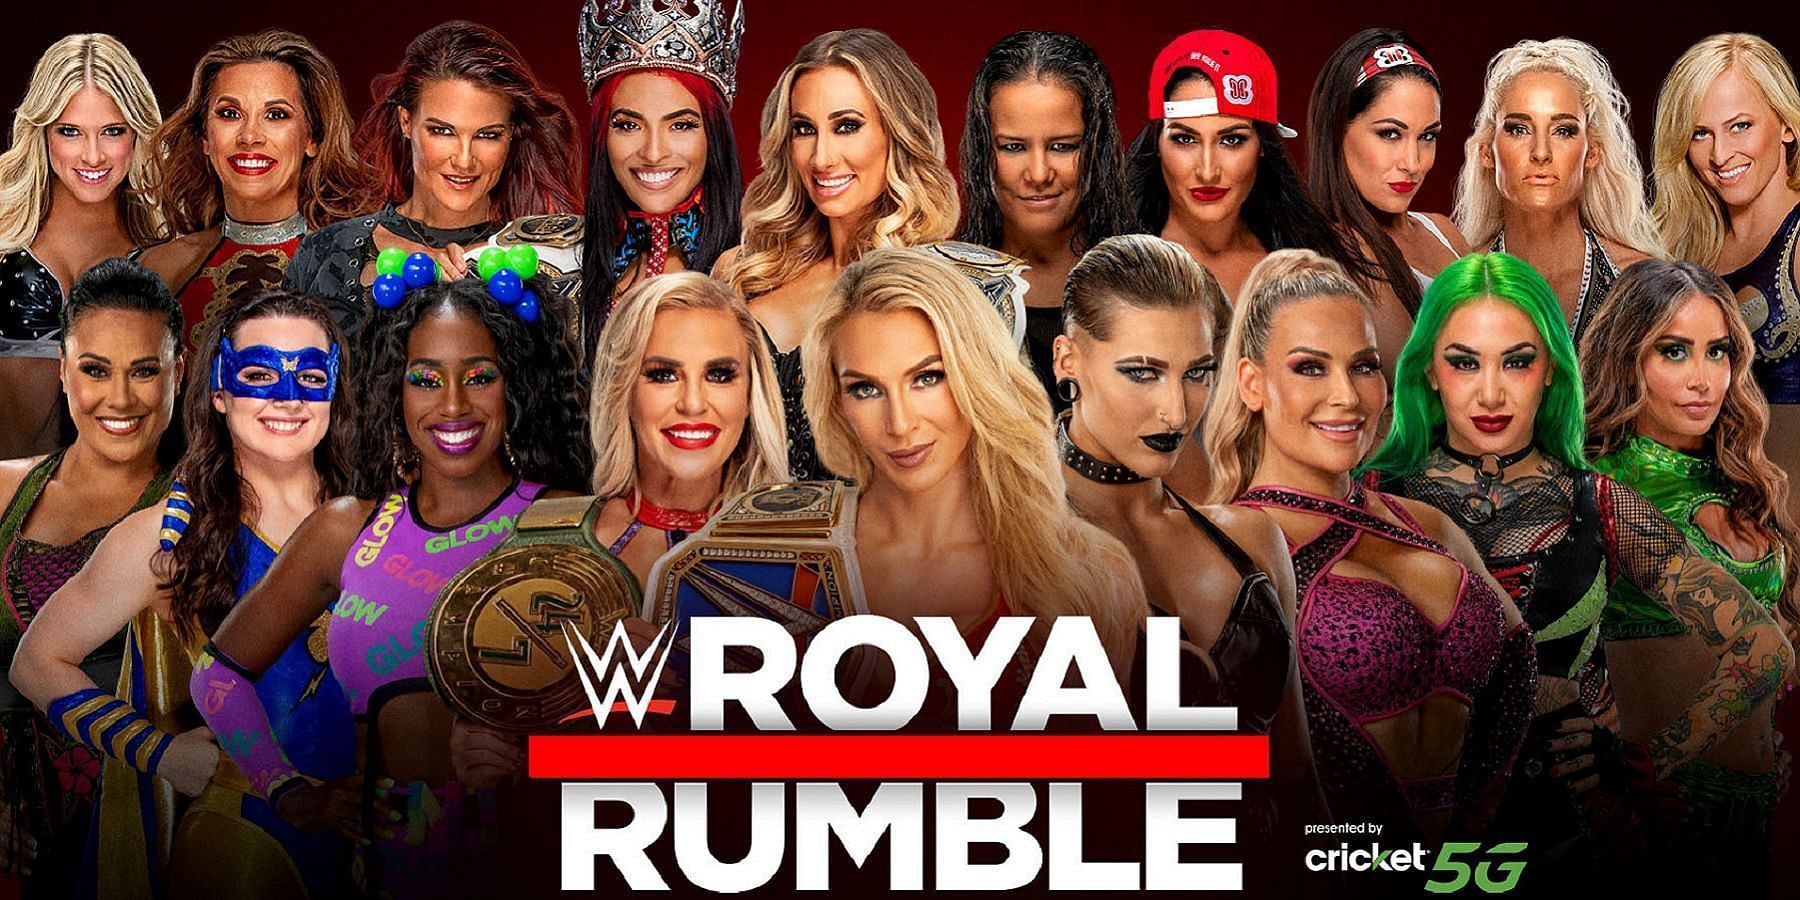 What surprises could we see this Saturday at the Royal Rumble?